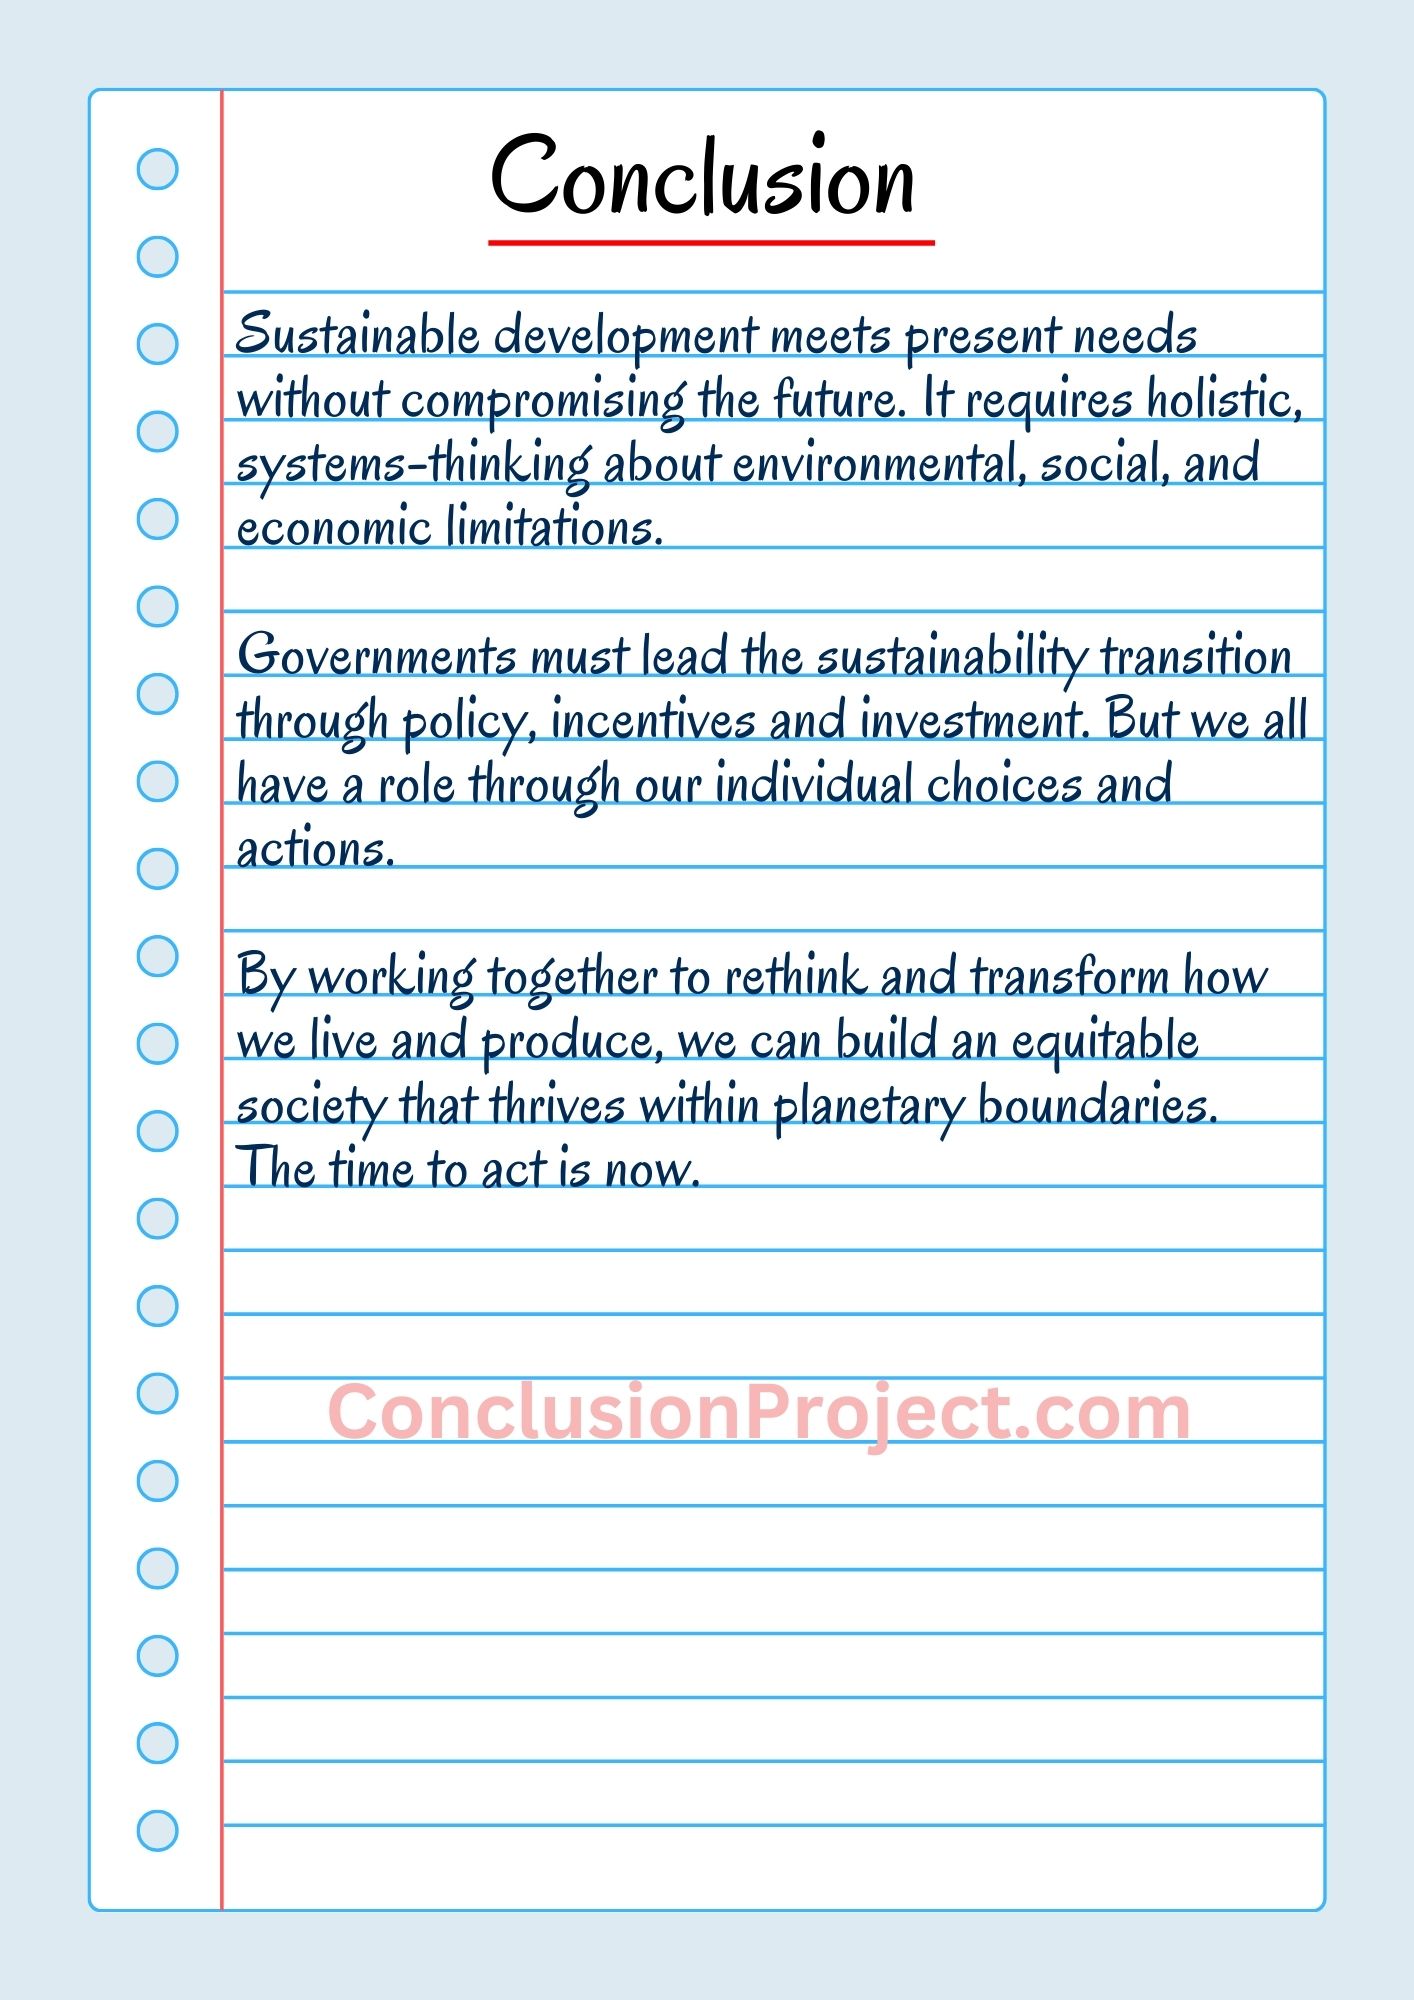 Conclusion of Sustainable Development